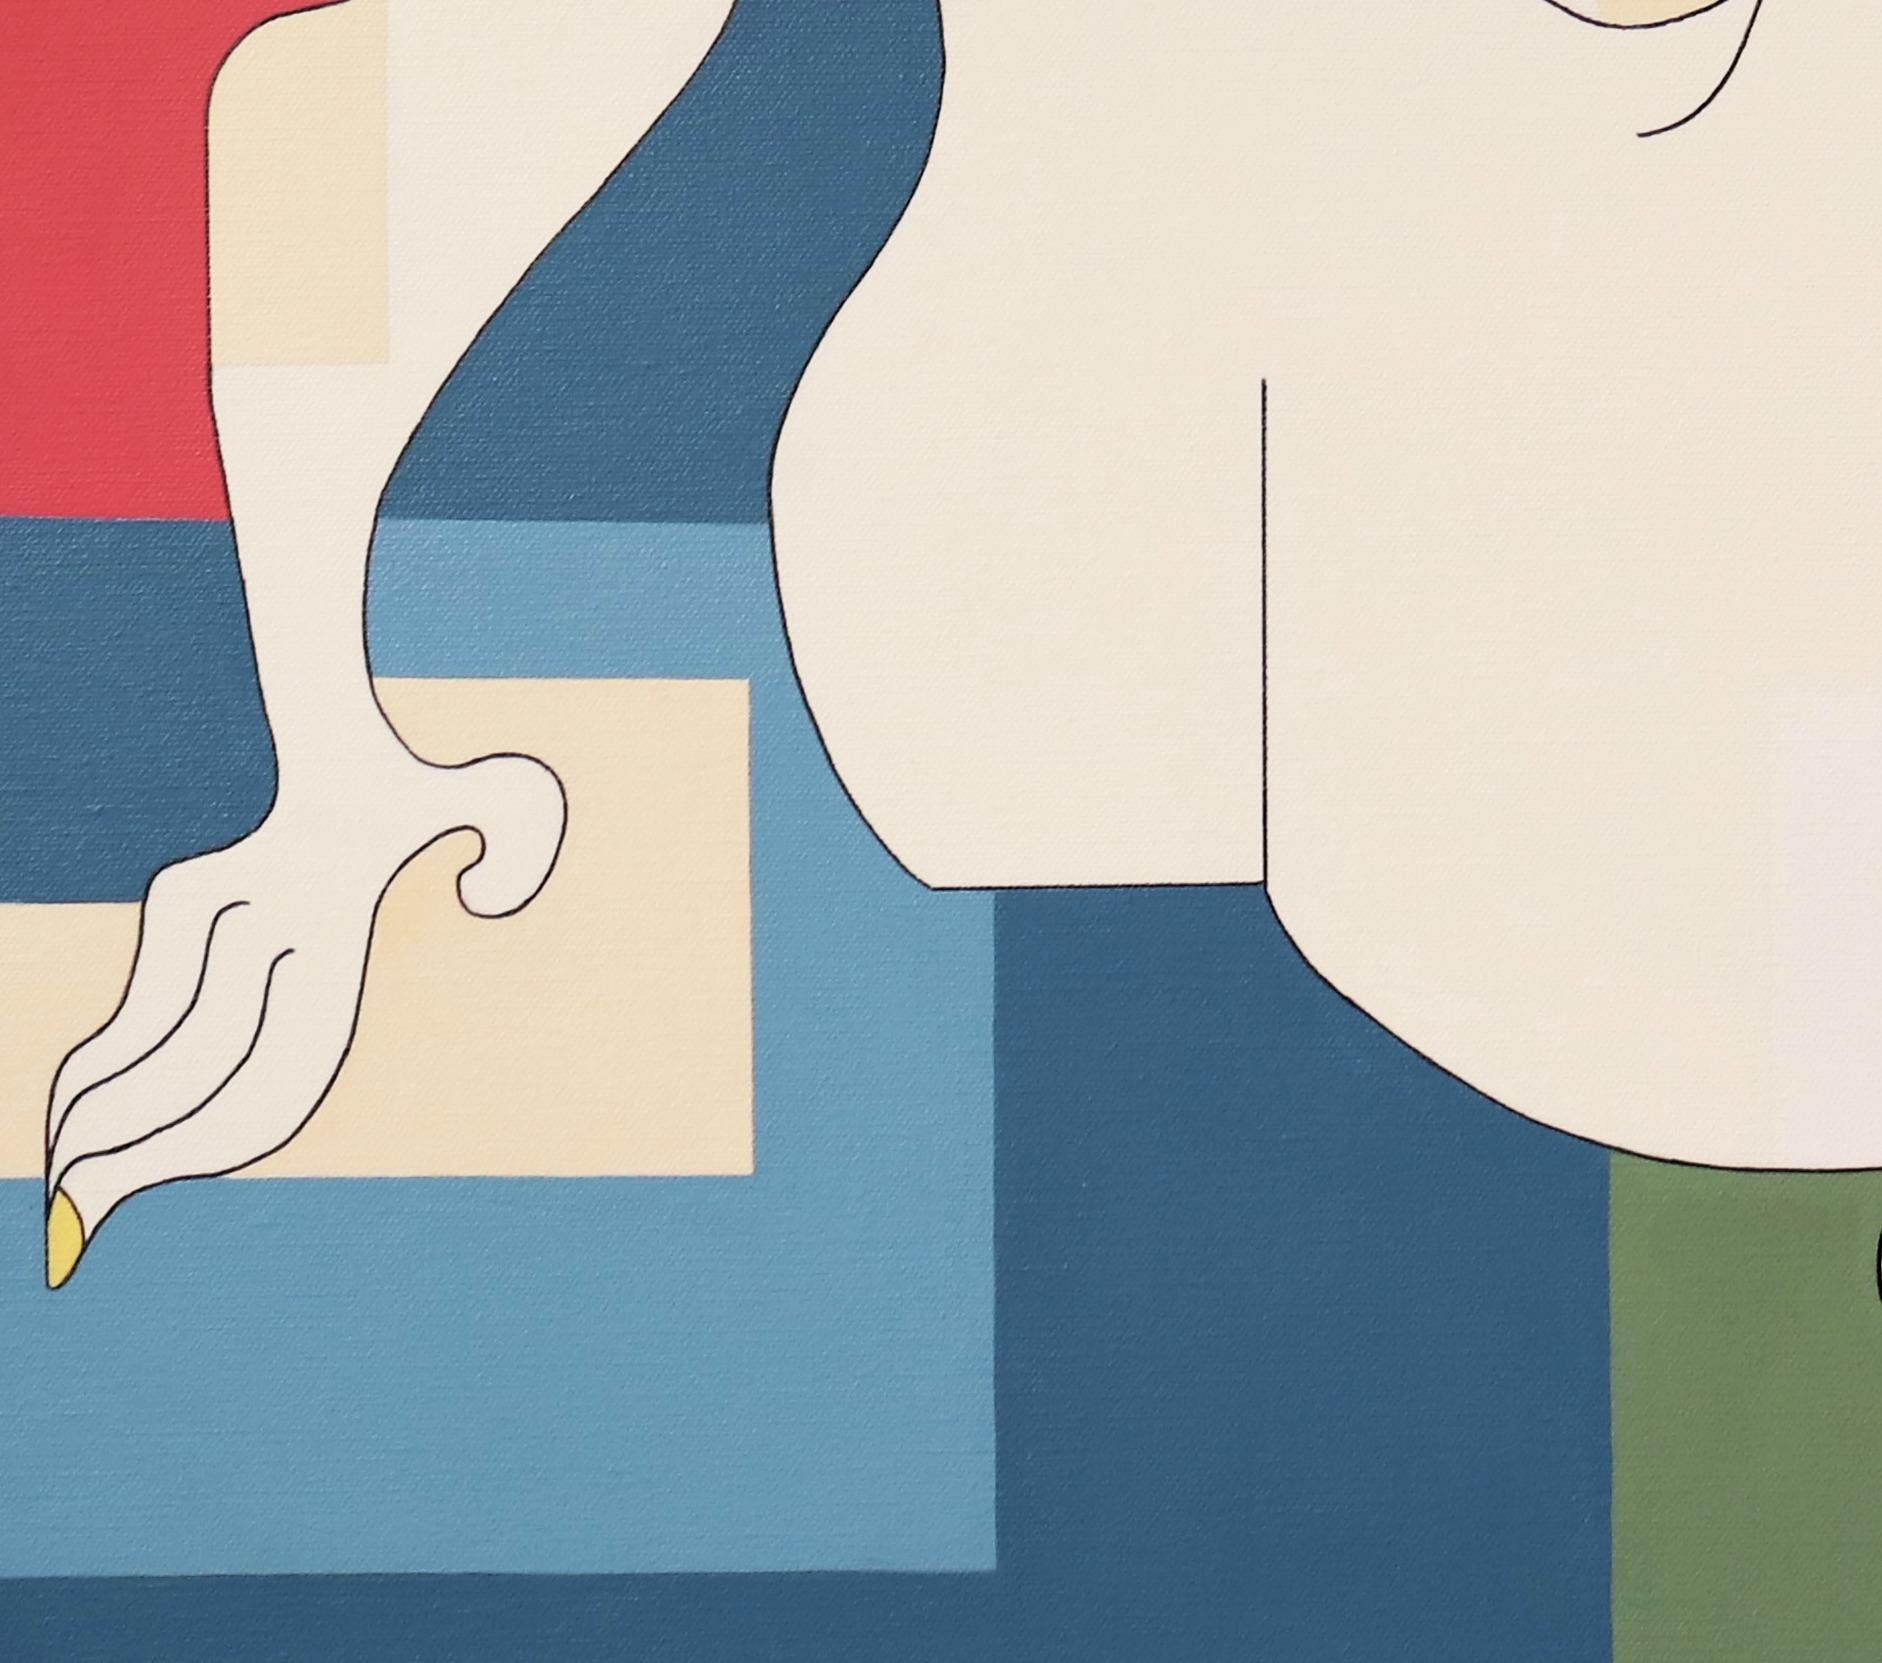 'Fidelis'  is a wonderful modern abstract painting on canvas by emerging Belgian artist - Hildegarde Handsaeme. It is a large acrylic figurative artwork showing a couple of women symmetrically positioned across each other. With some similarities